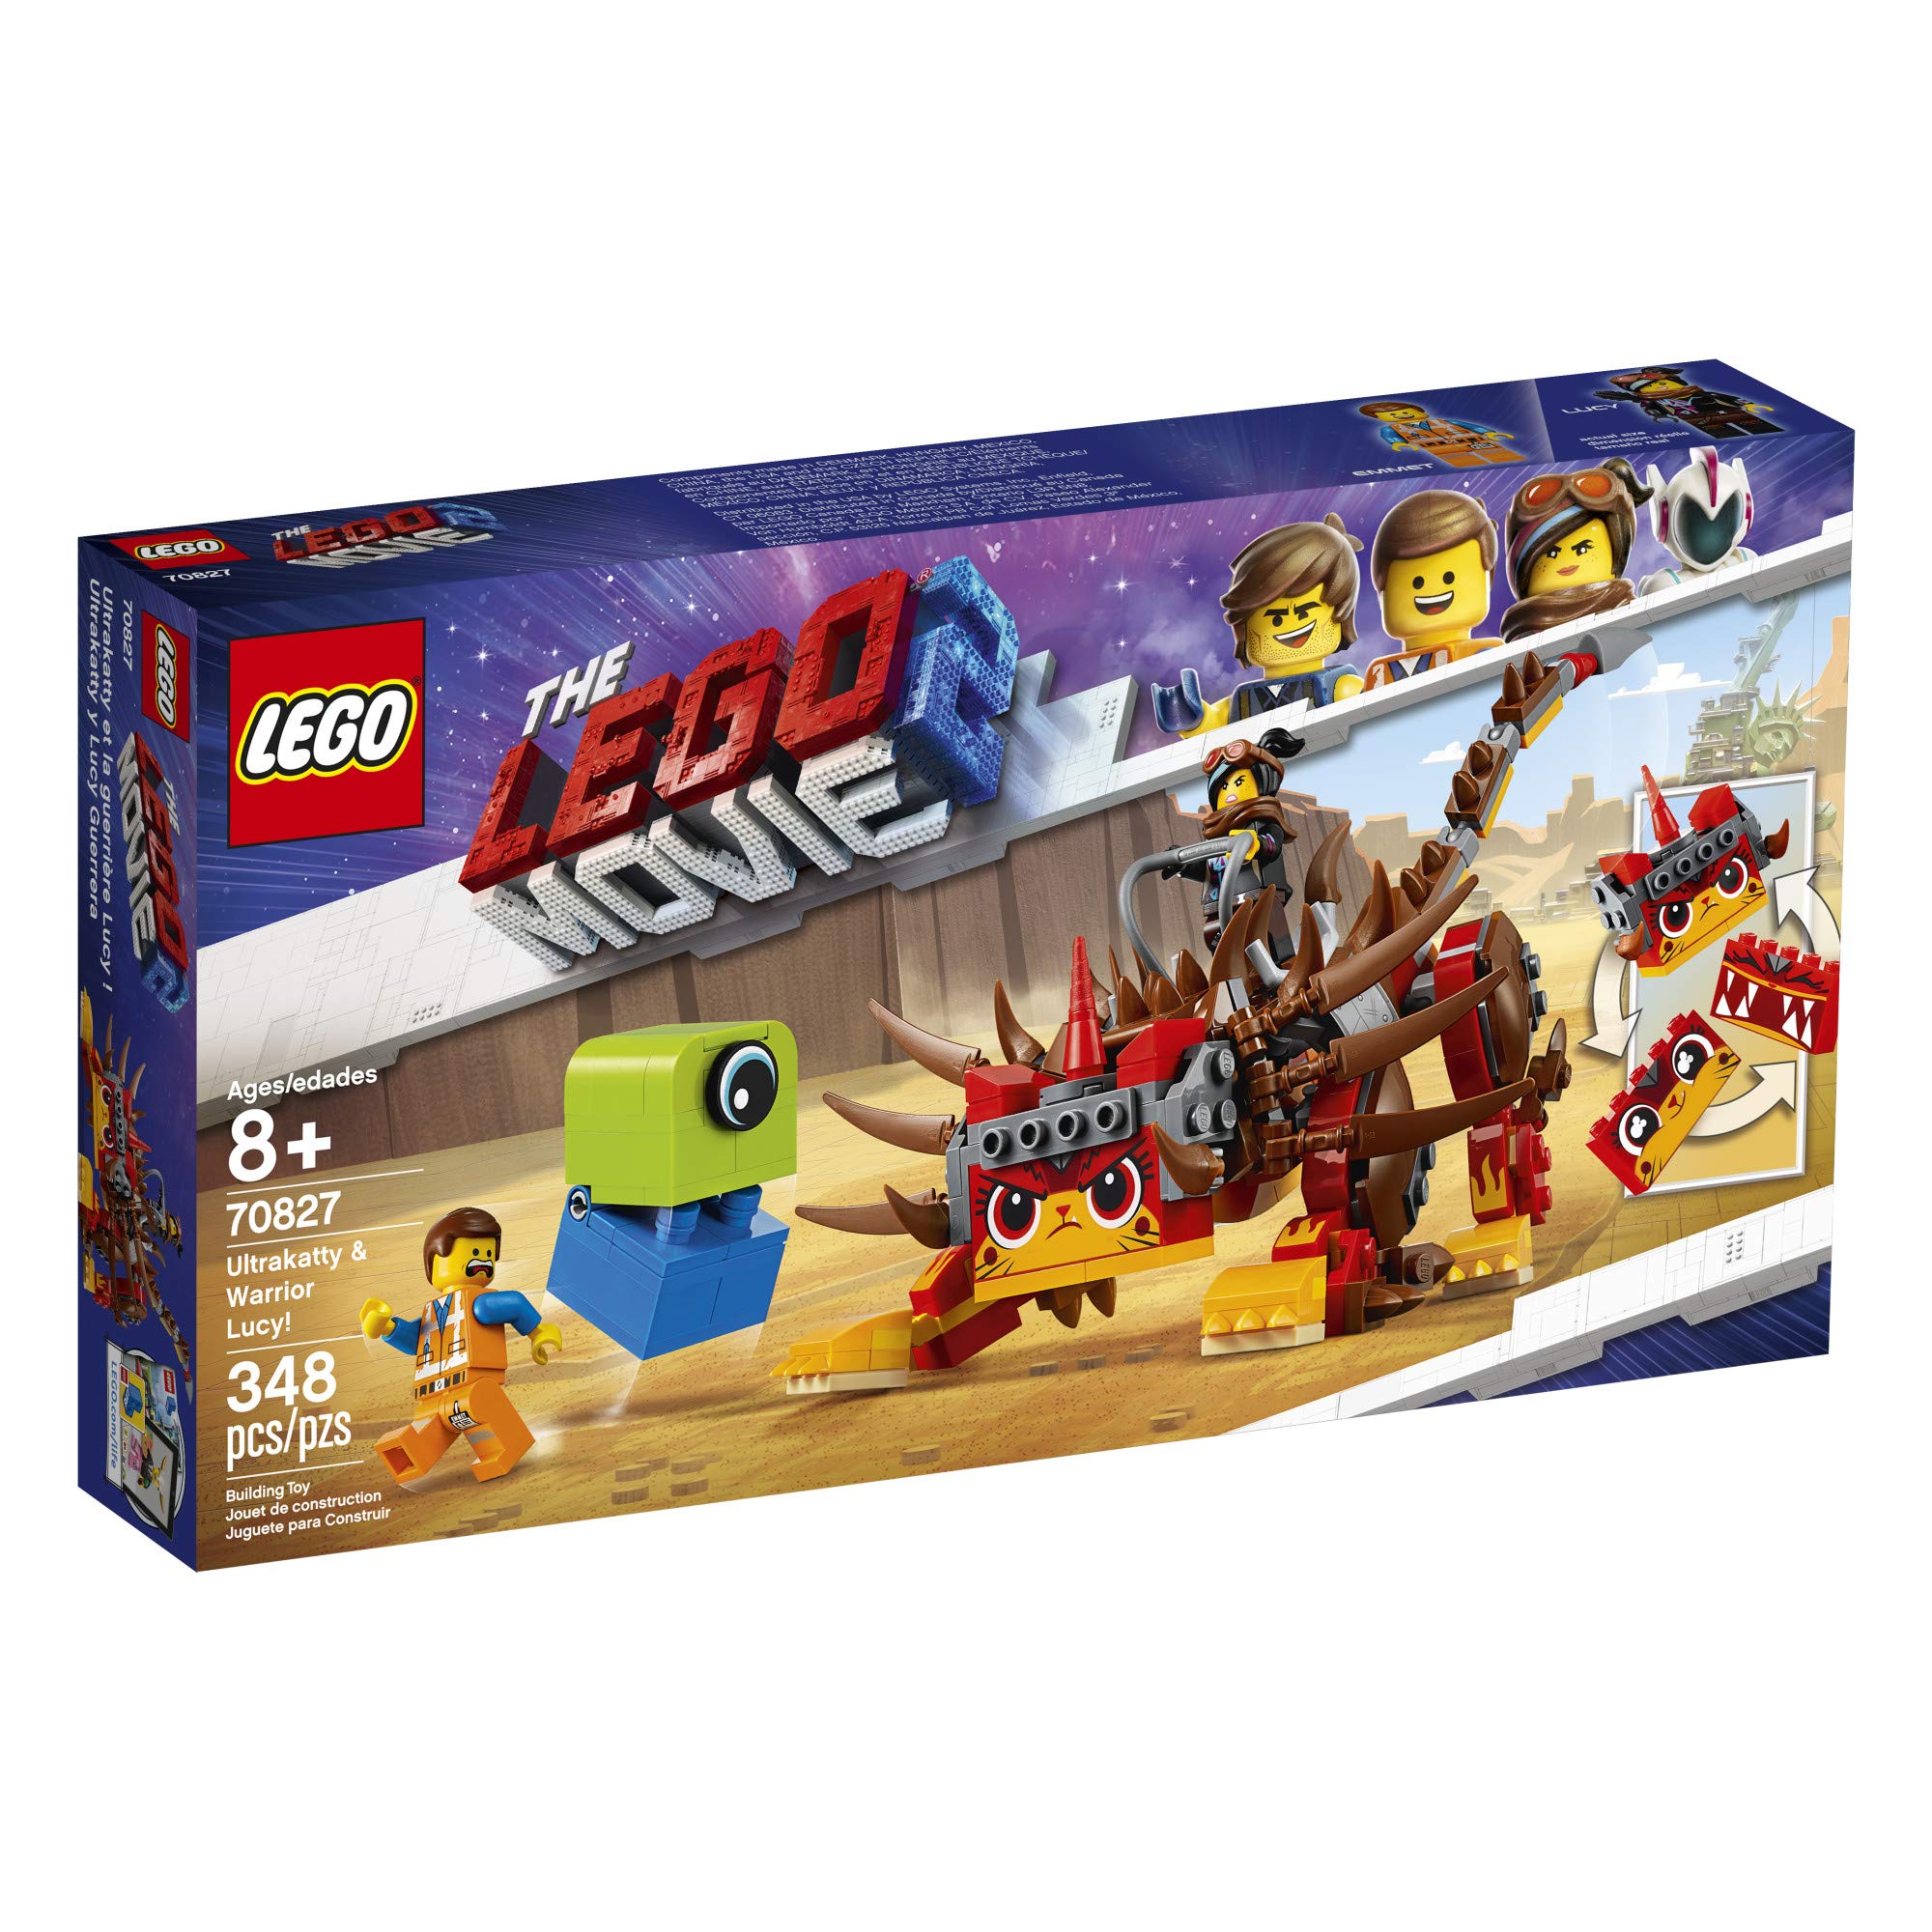 LEGO The Movie 2 Ultrakatty & Warrior Lucy; 70827 Action Creative Building Kit for Kids (348 Pieces)